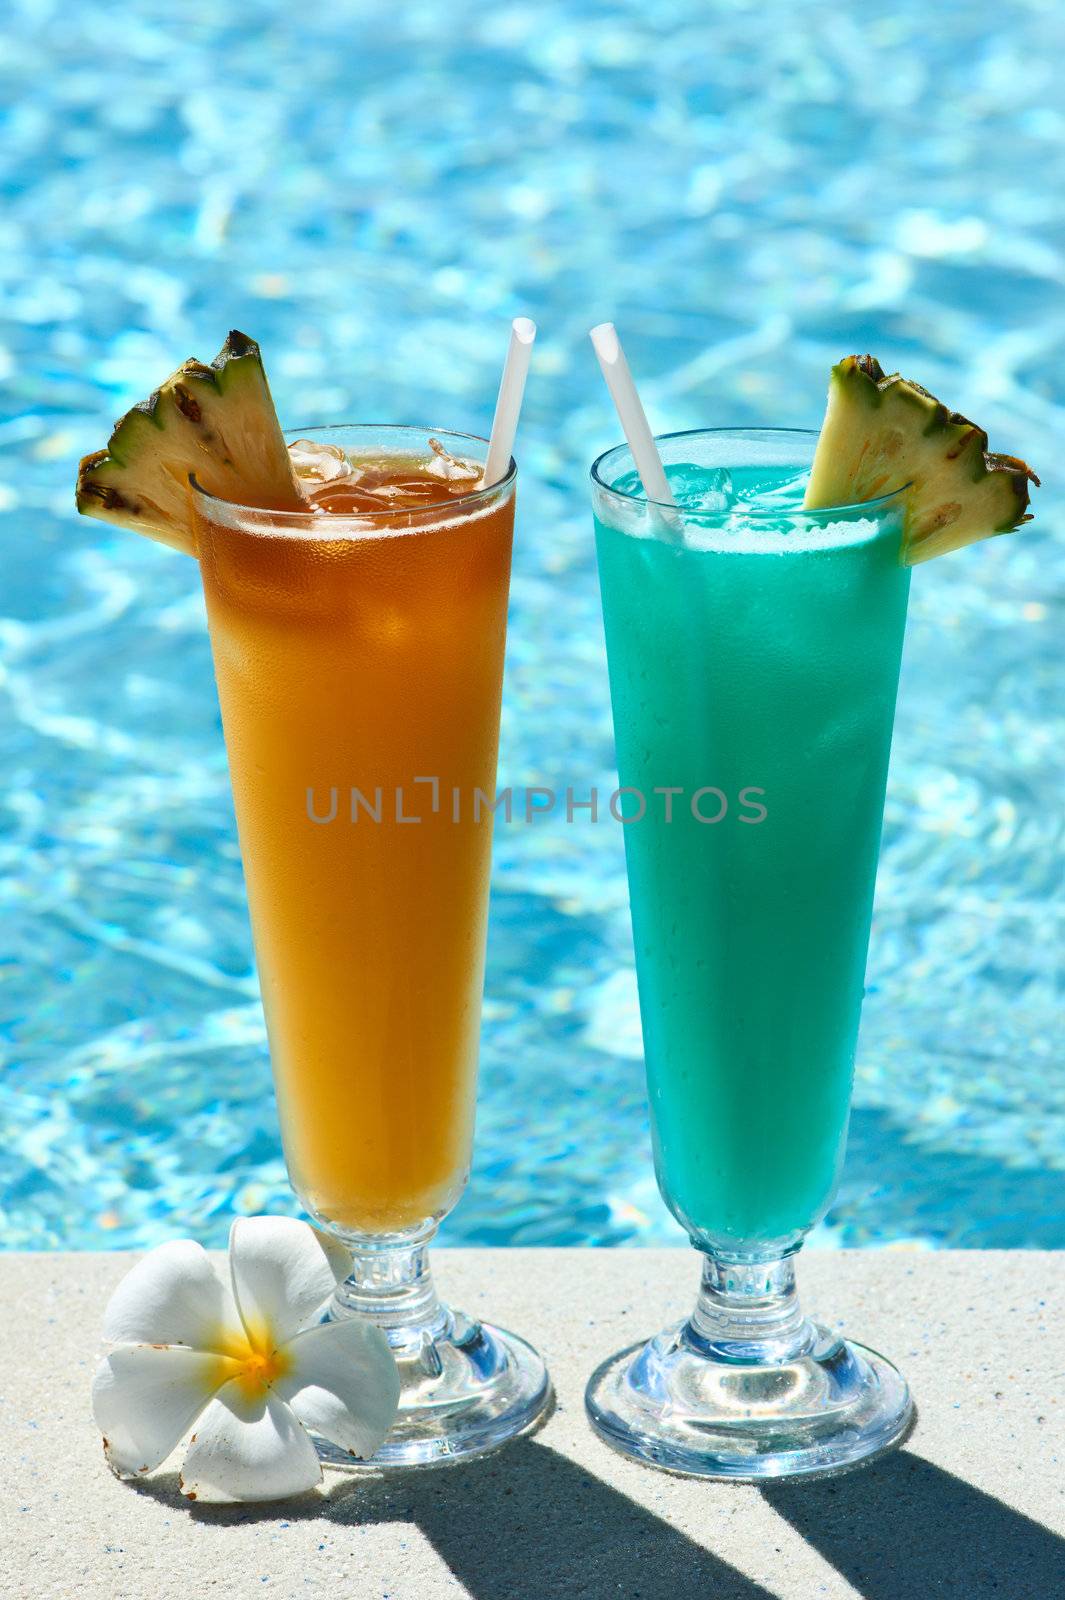 Cocktails near swimming pool by haveseen